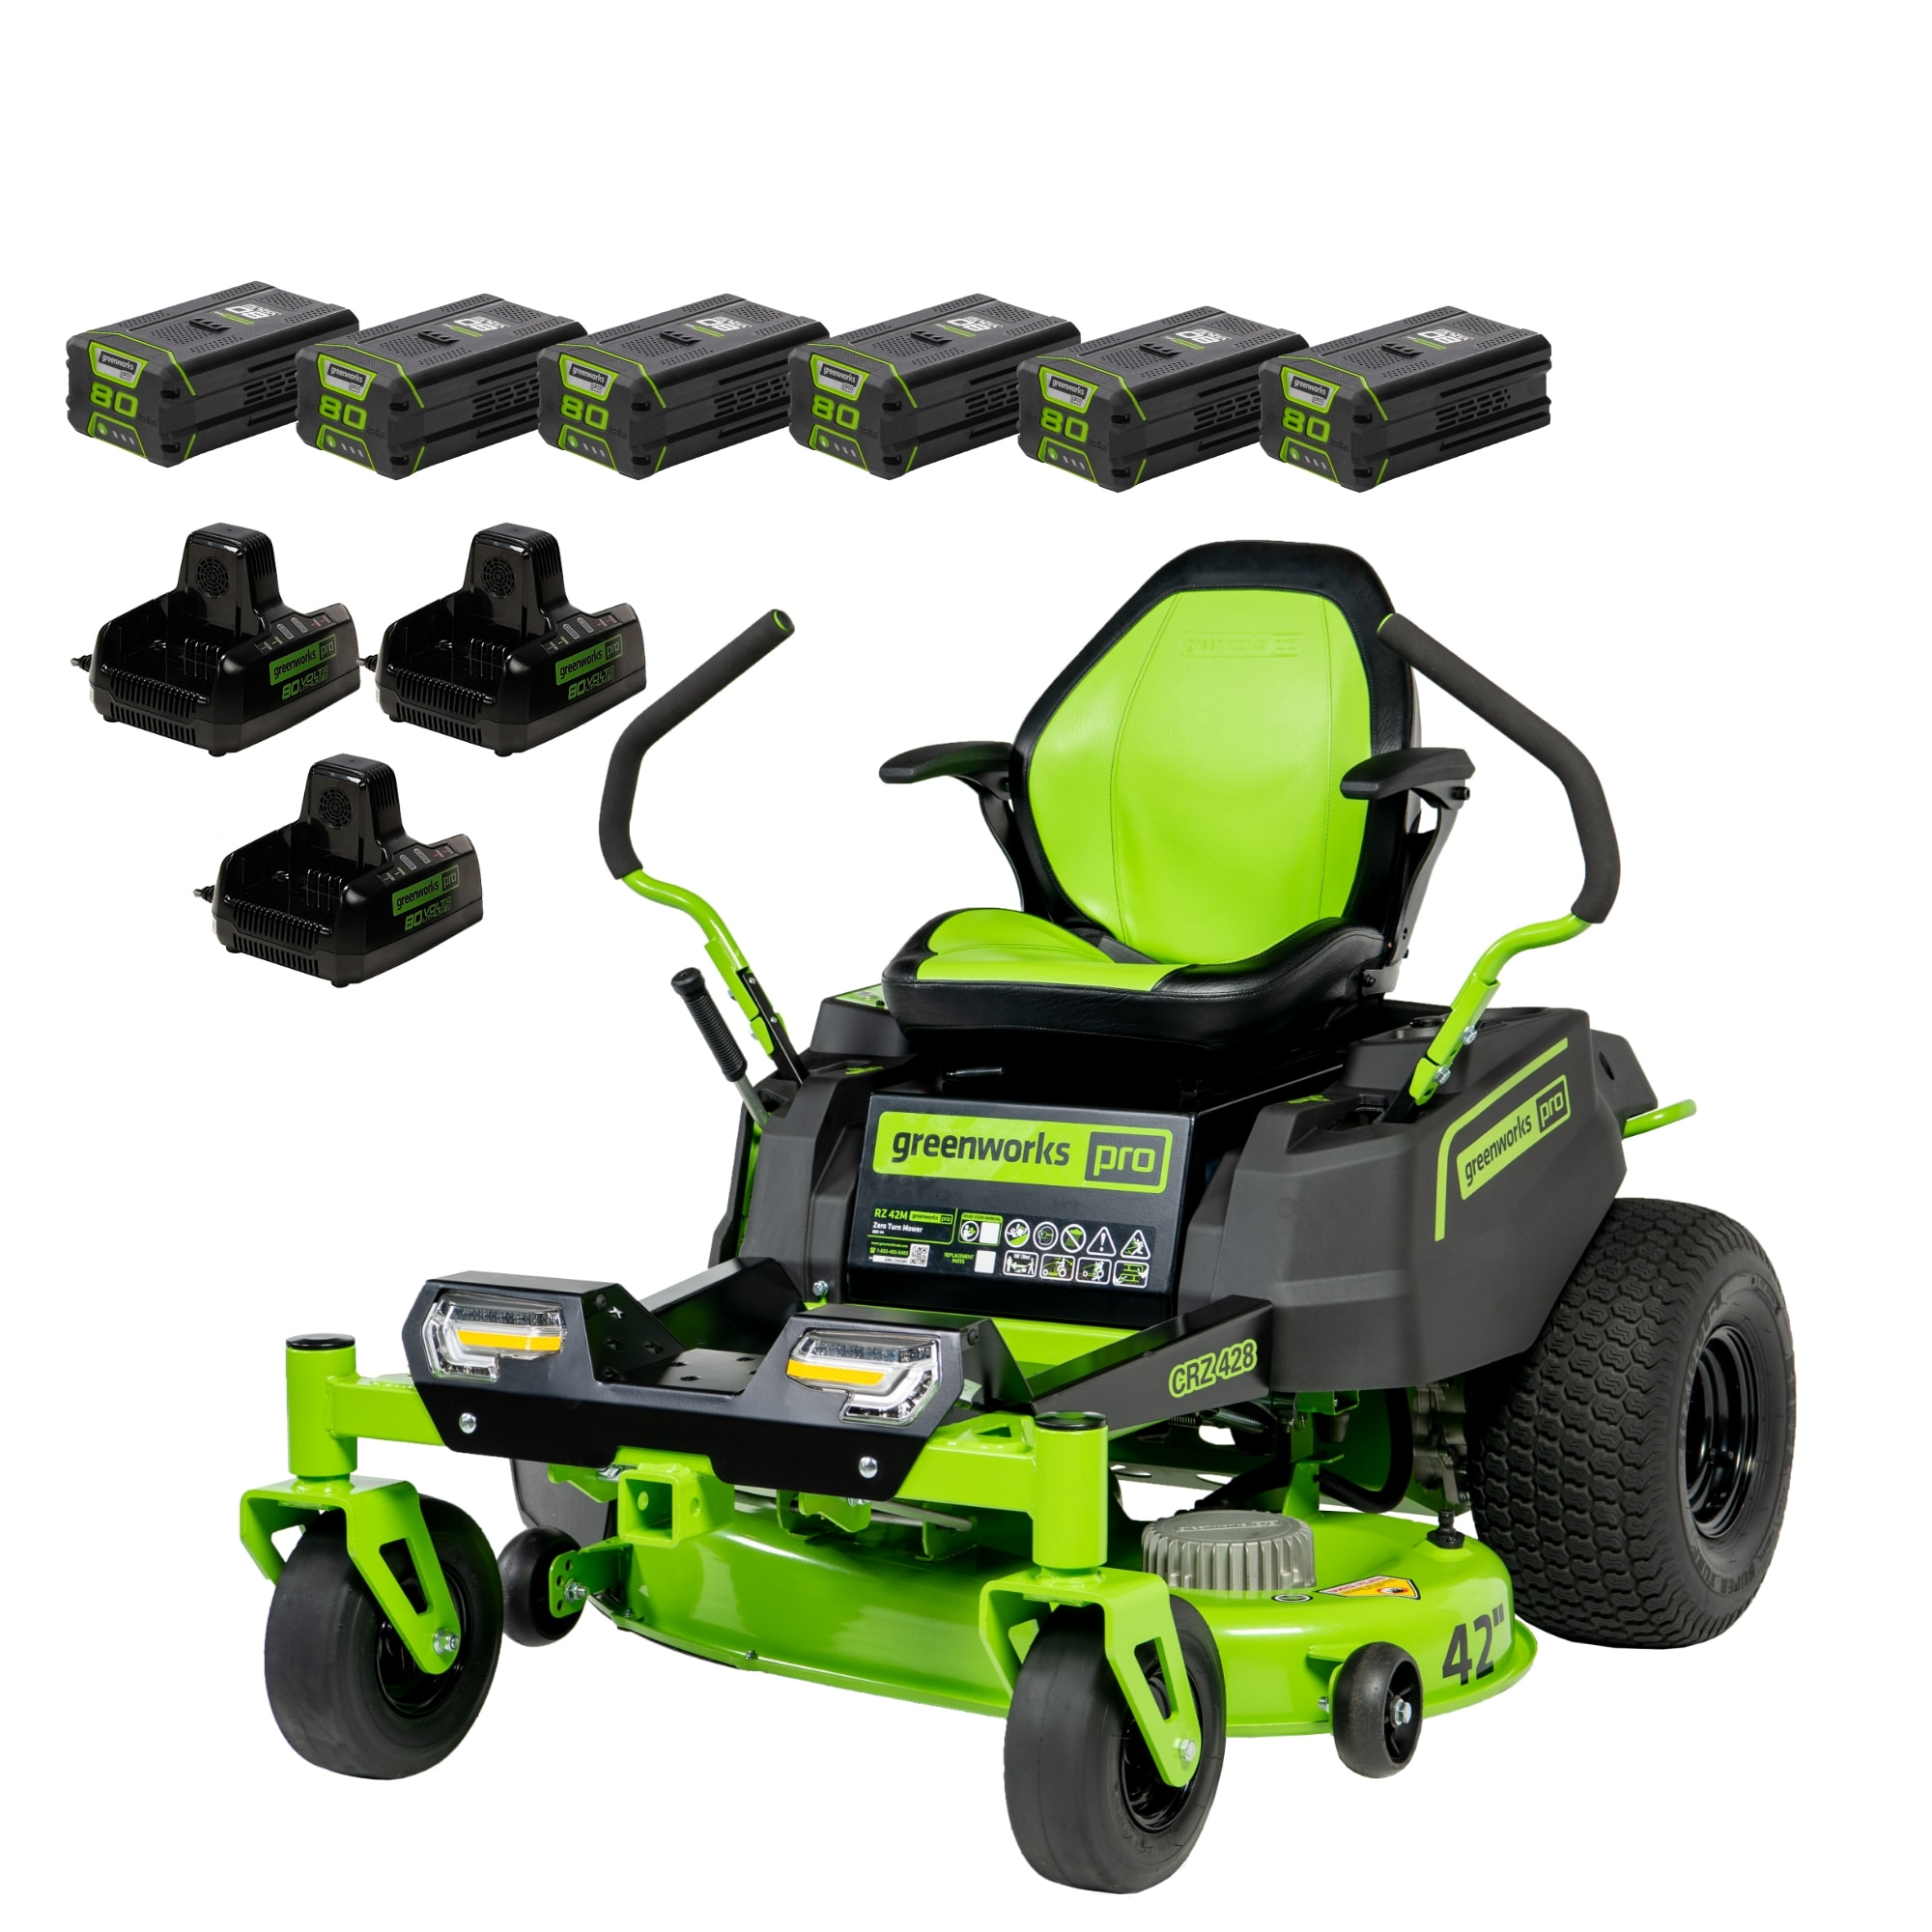 Greenworks Pro Crossover Zero Turn 42-in 80-volt Lithium Ion Electric  Riding Lawn Mower with (6) 5 Ah Batteries (Charger Included)